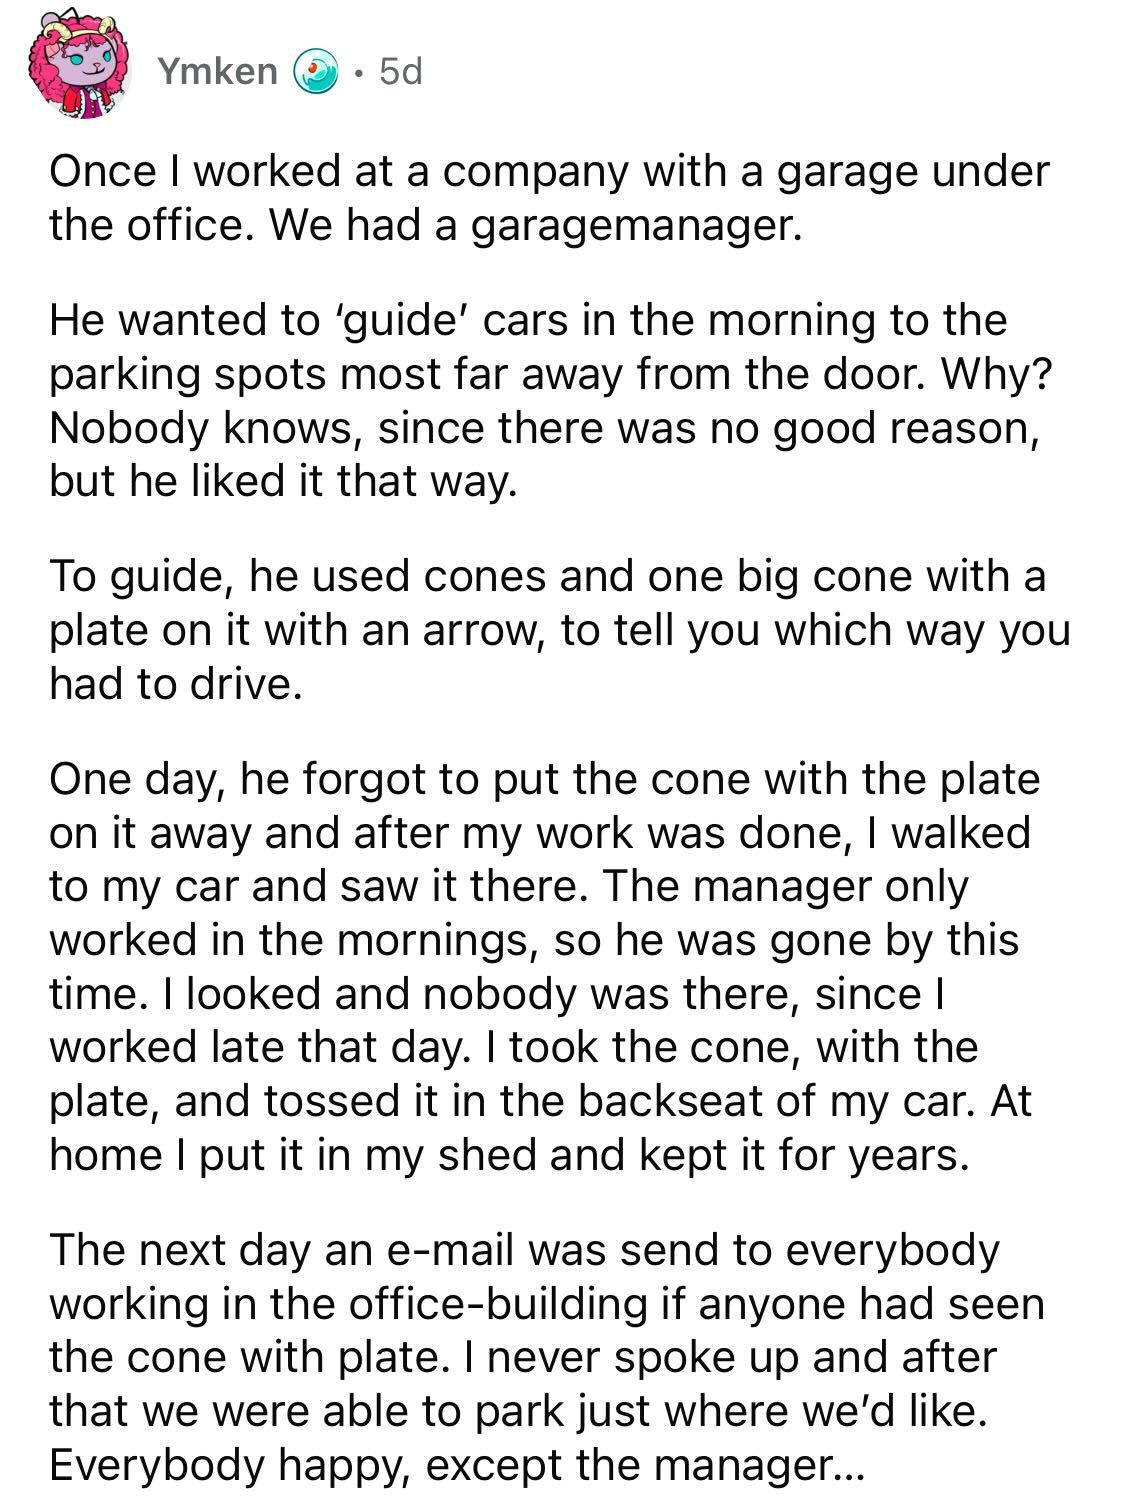 Male Karen Loses Parking Spot -  Once I worked at a company with a garage under the office. We had a garagemanager. He wanted to 'guide' cars in the morning to the parking spots most far away from the door. Why? Nobody knows, since there was no good reaso